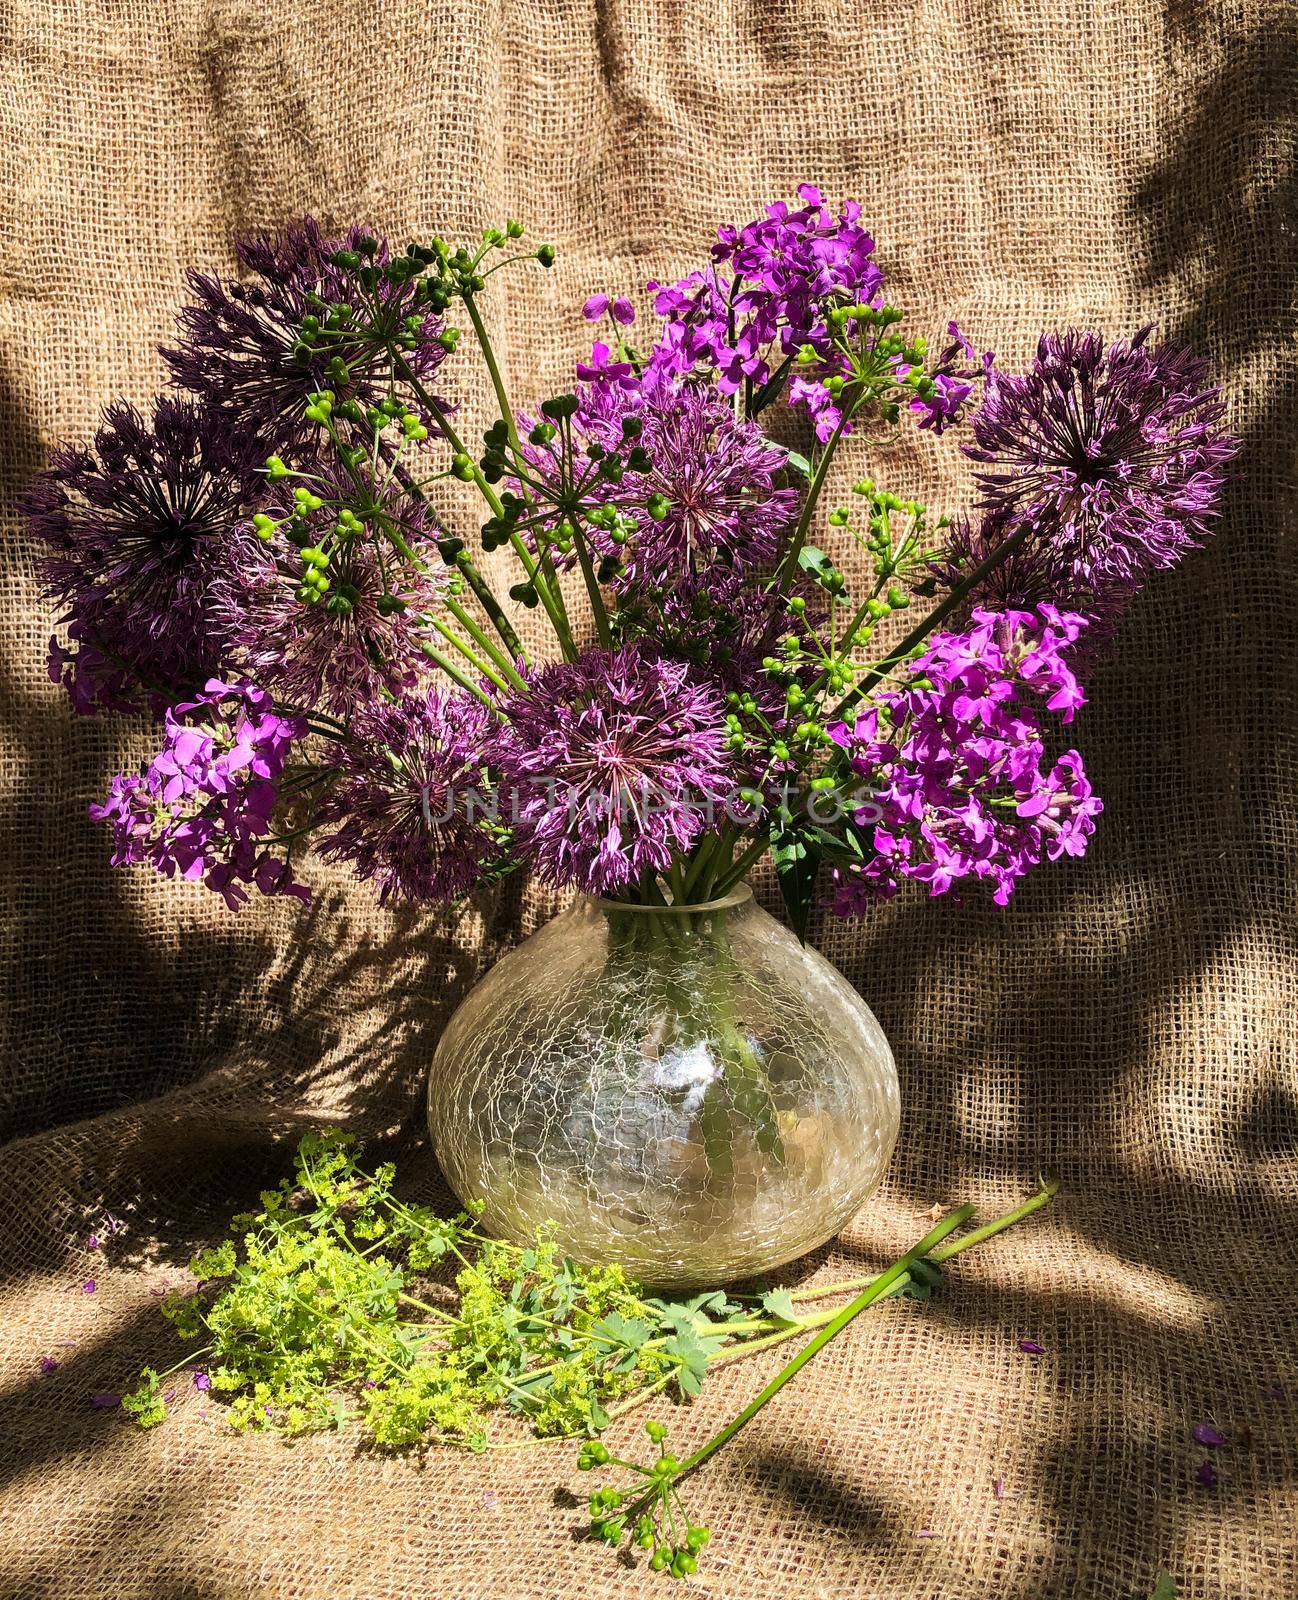 Romantic bouquets of flowers. Home decor and flowers arranging. Bouquet of aliums in the rays of sunlight